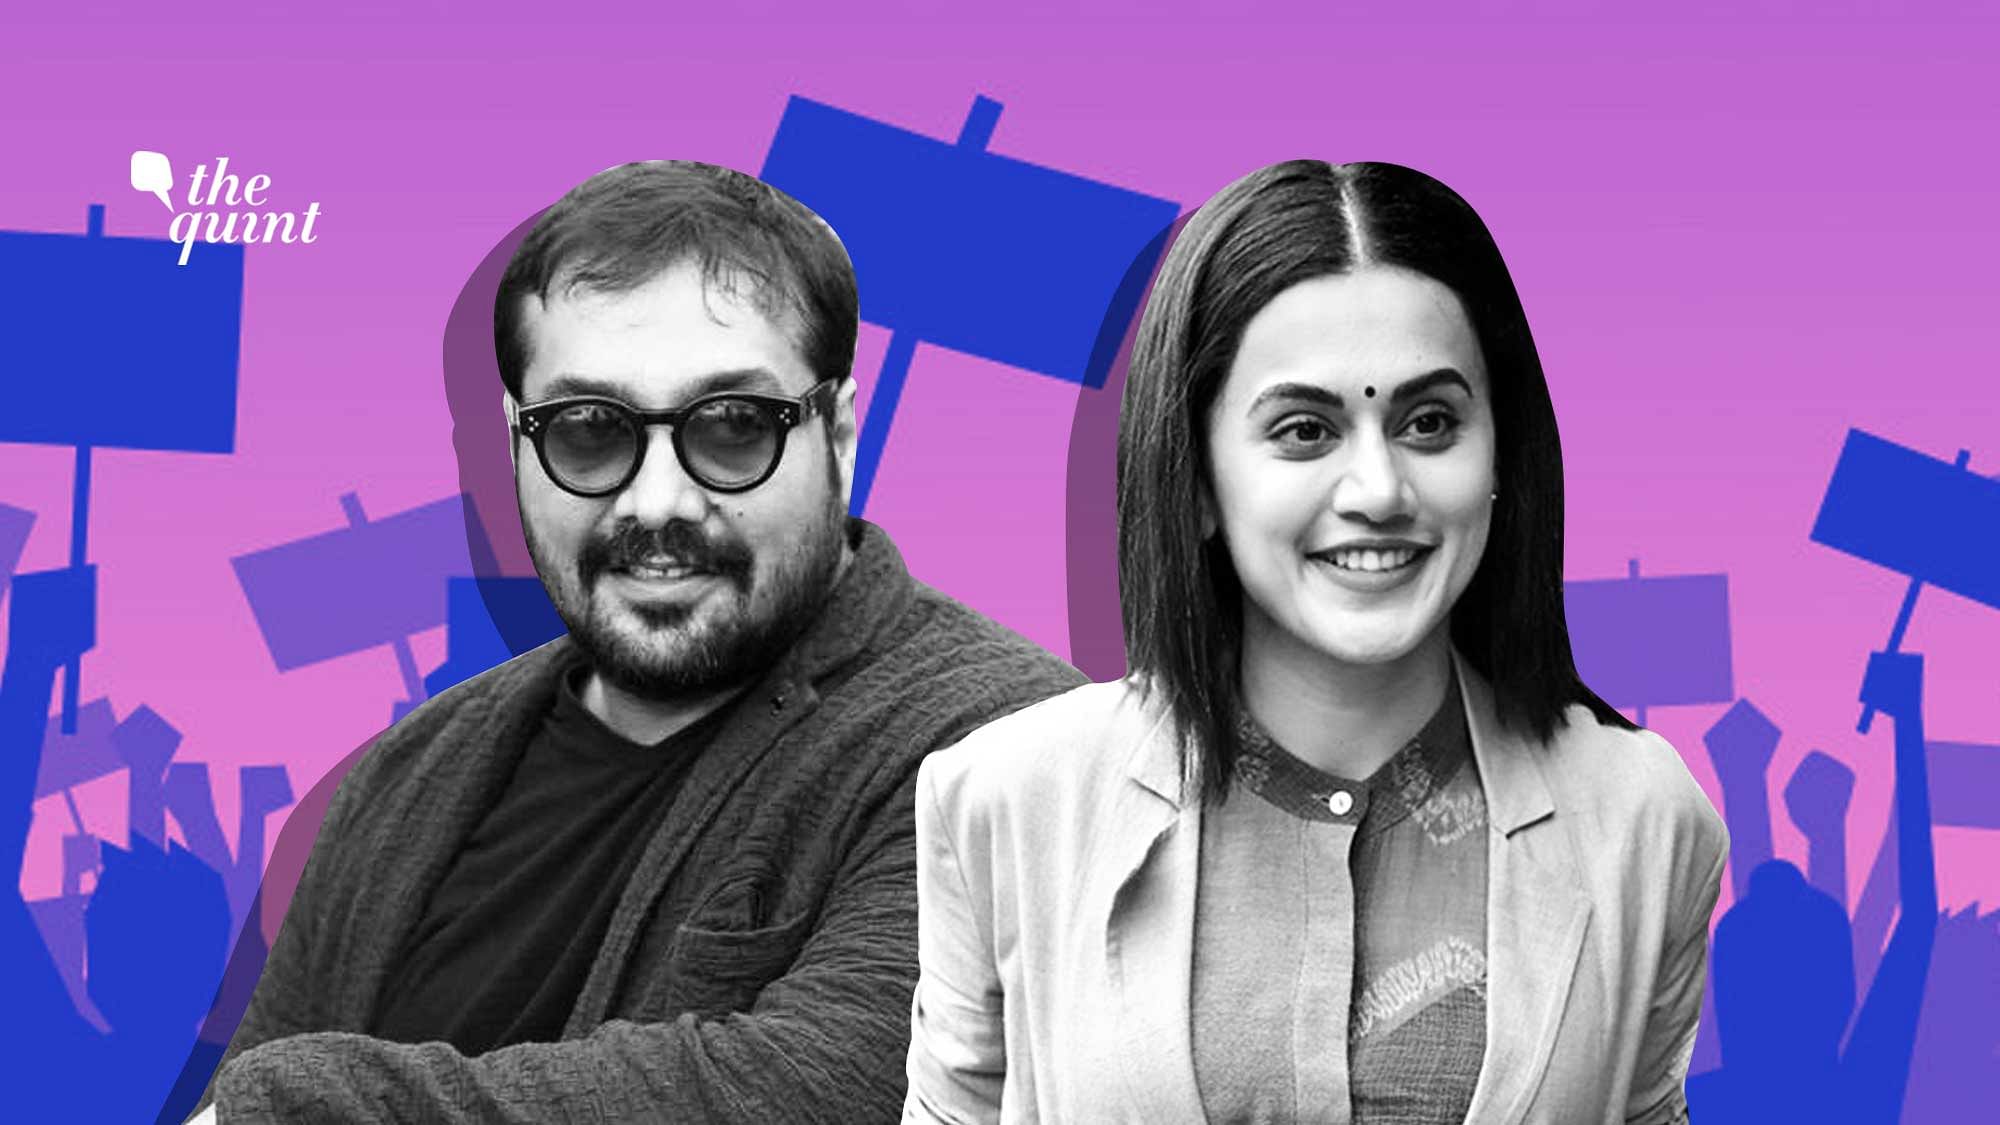 Anurag Kashyap and Taapsee Pannu were among others raided by the IT department, allegedly on charges of tax evasion.&nbsp;